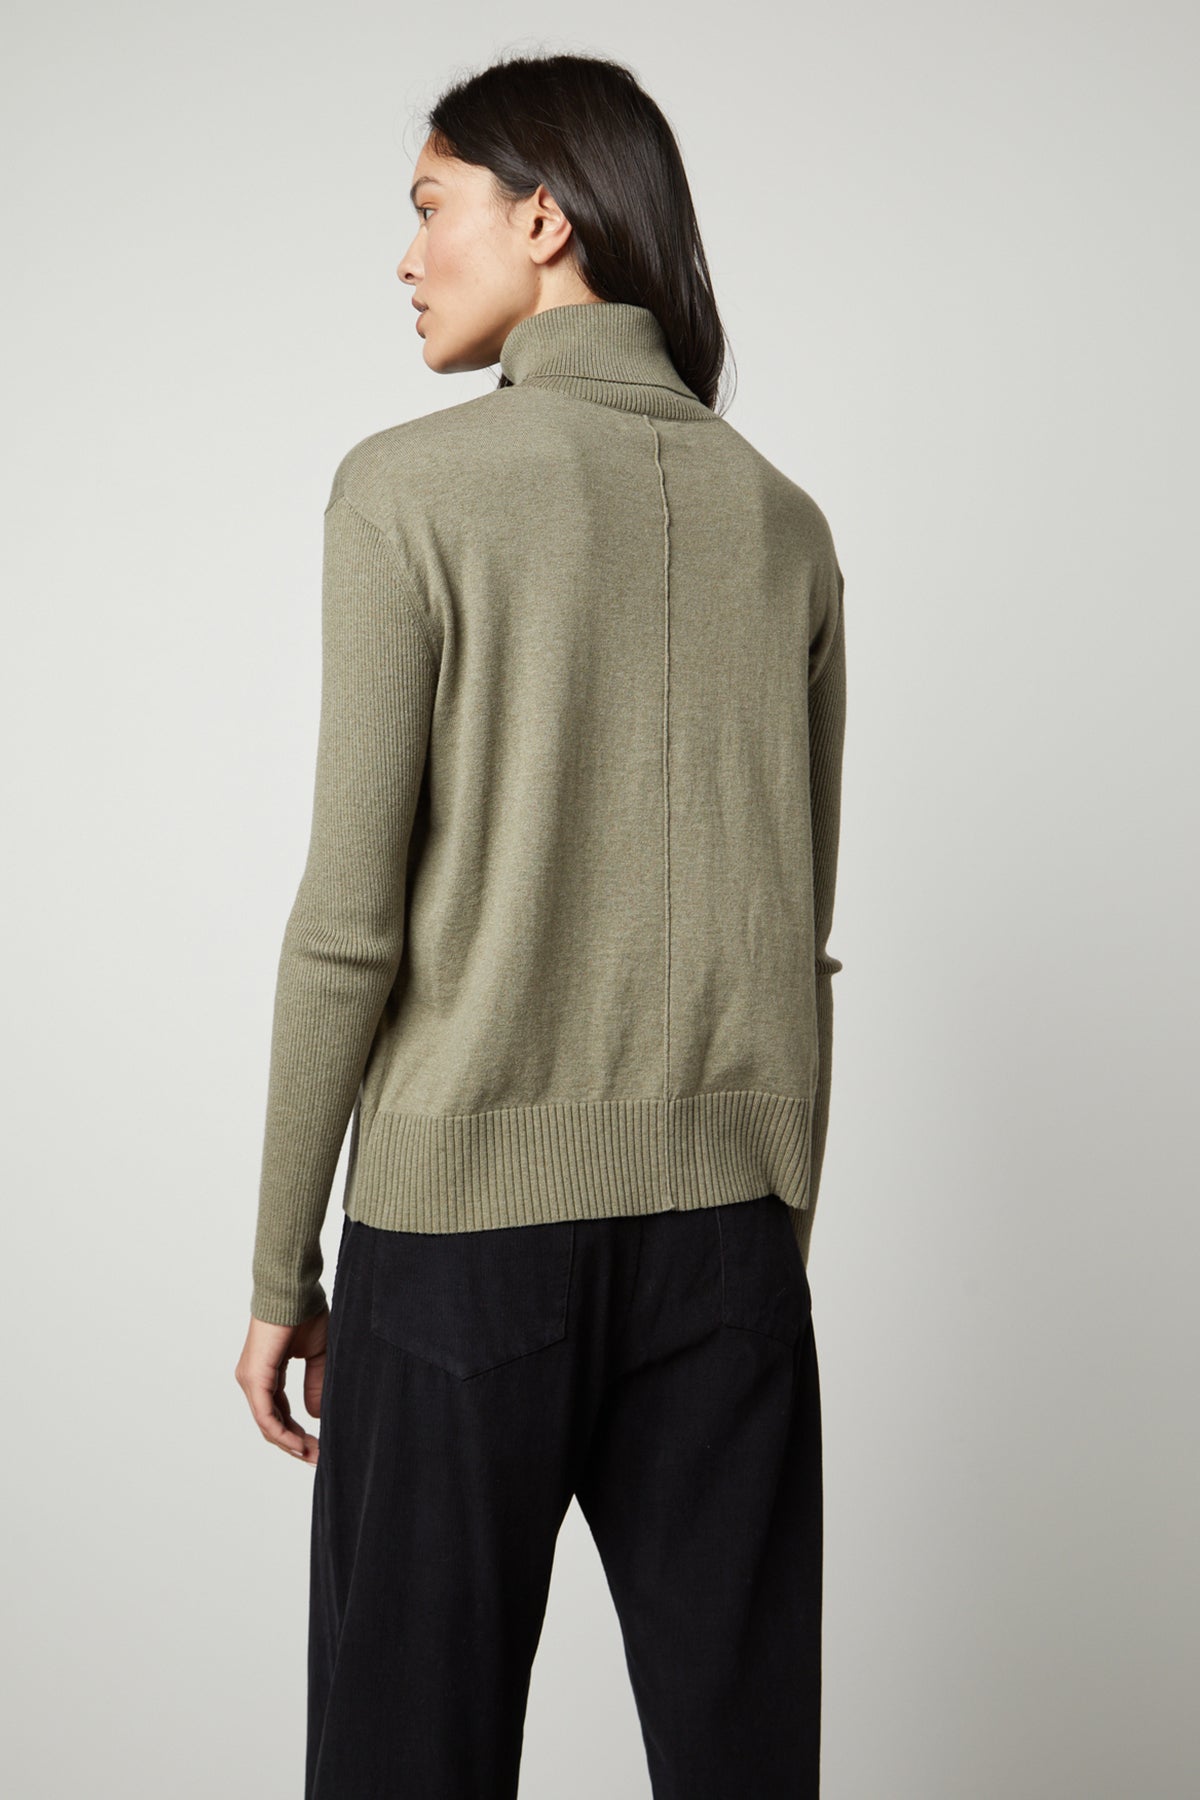 The back view of a woman wearing a ribbed, green SALLY MOCK NECK SWEATER by Velvet by Graham & Spencer.-35503515992257